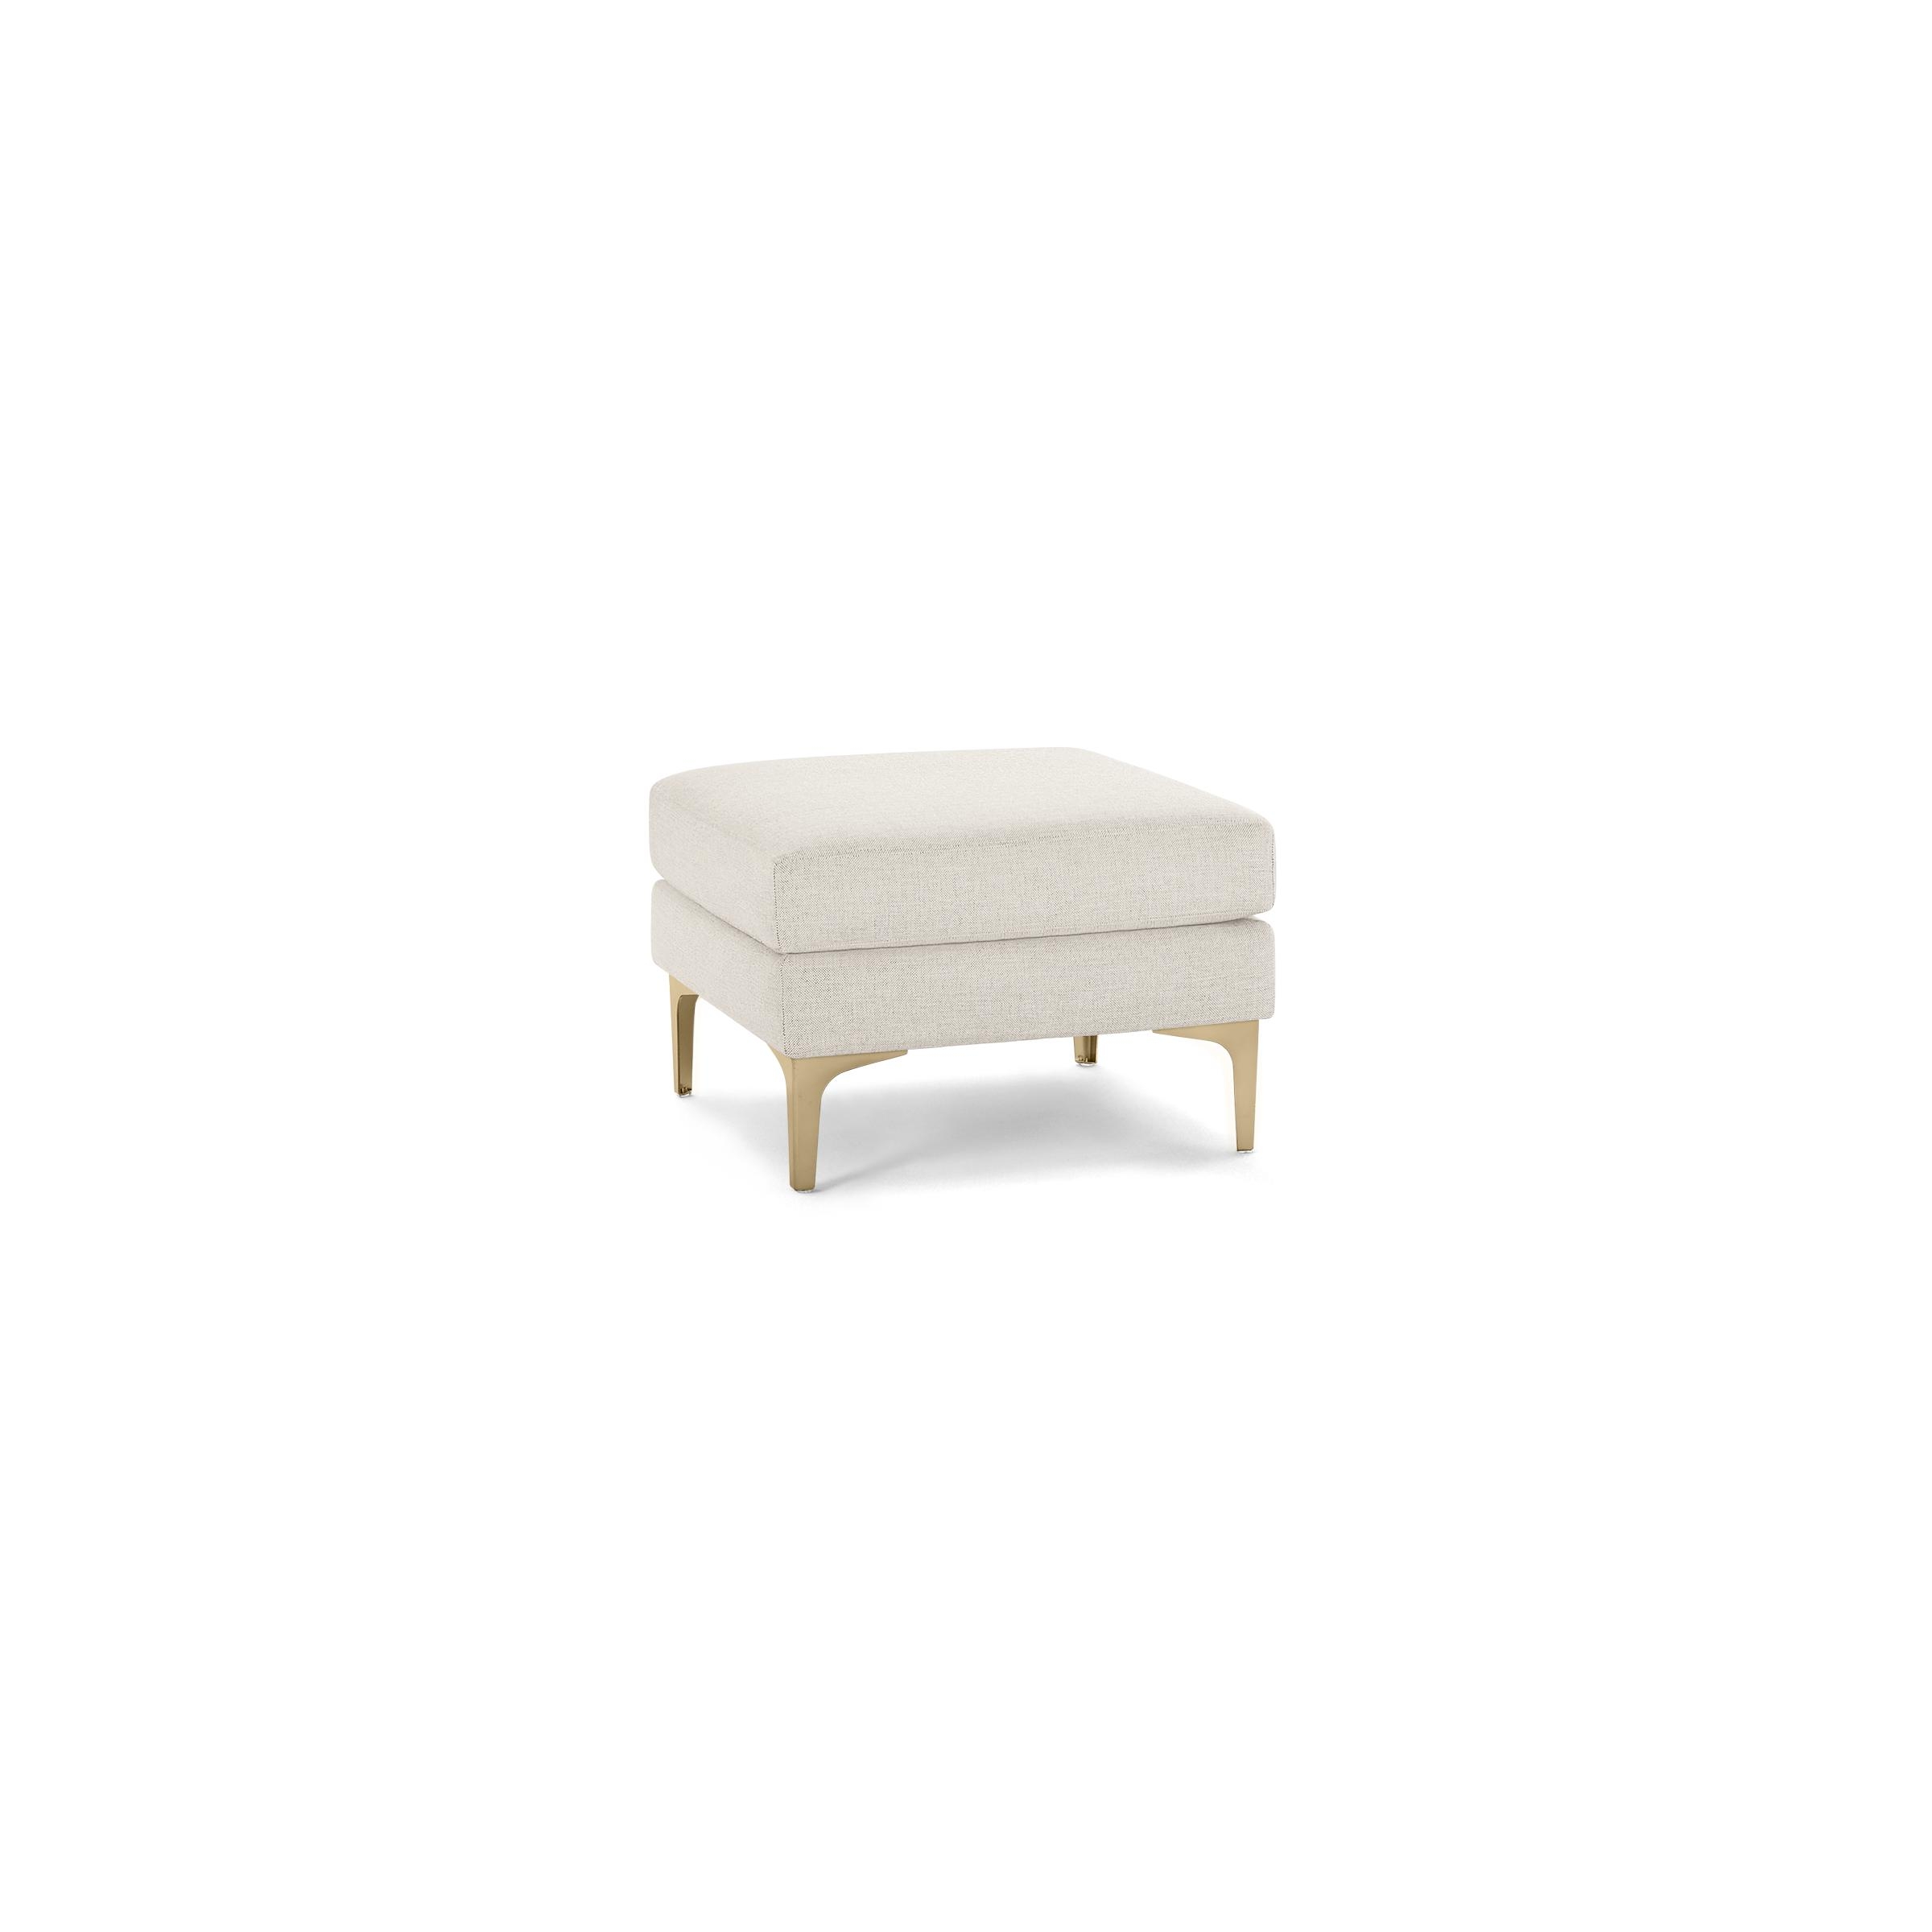 Nomad Ottoman in Ivory, Brass Legs - Image 0